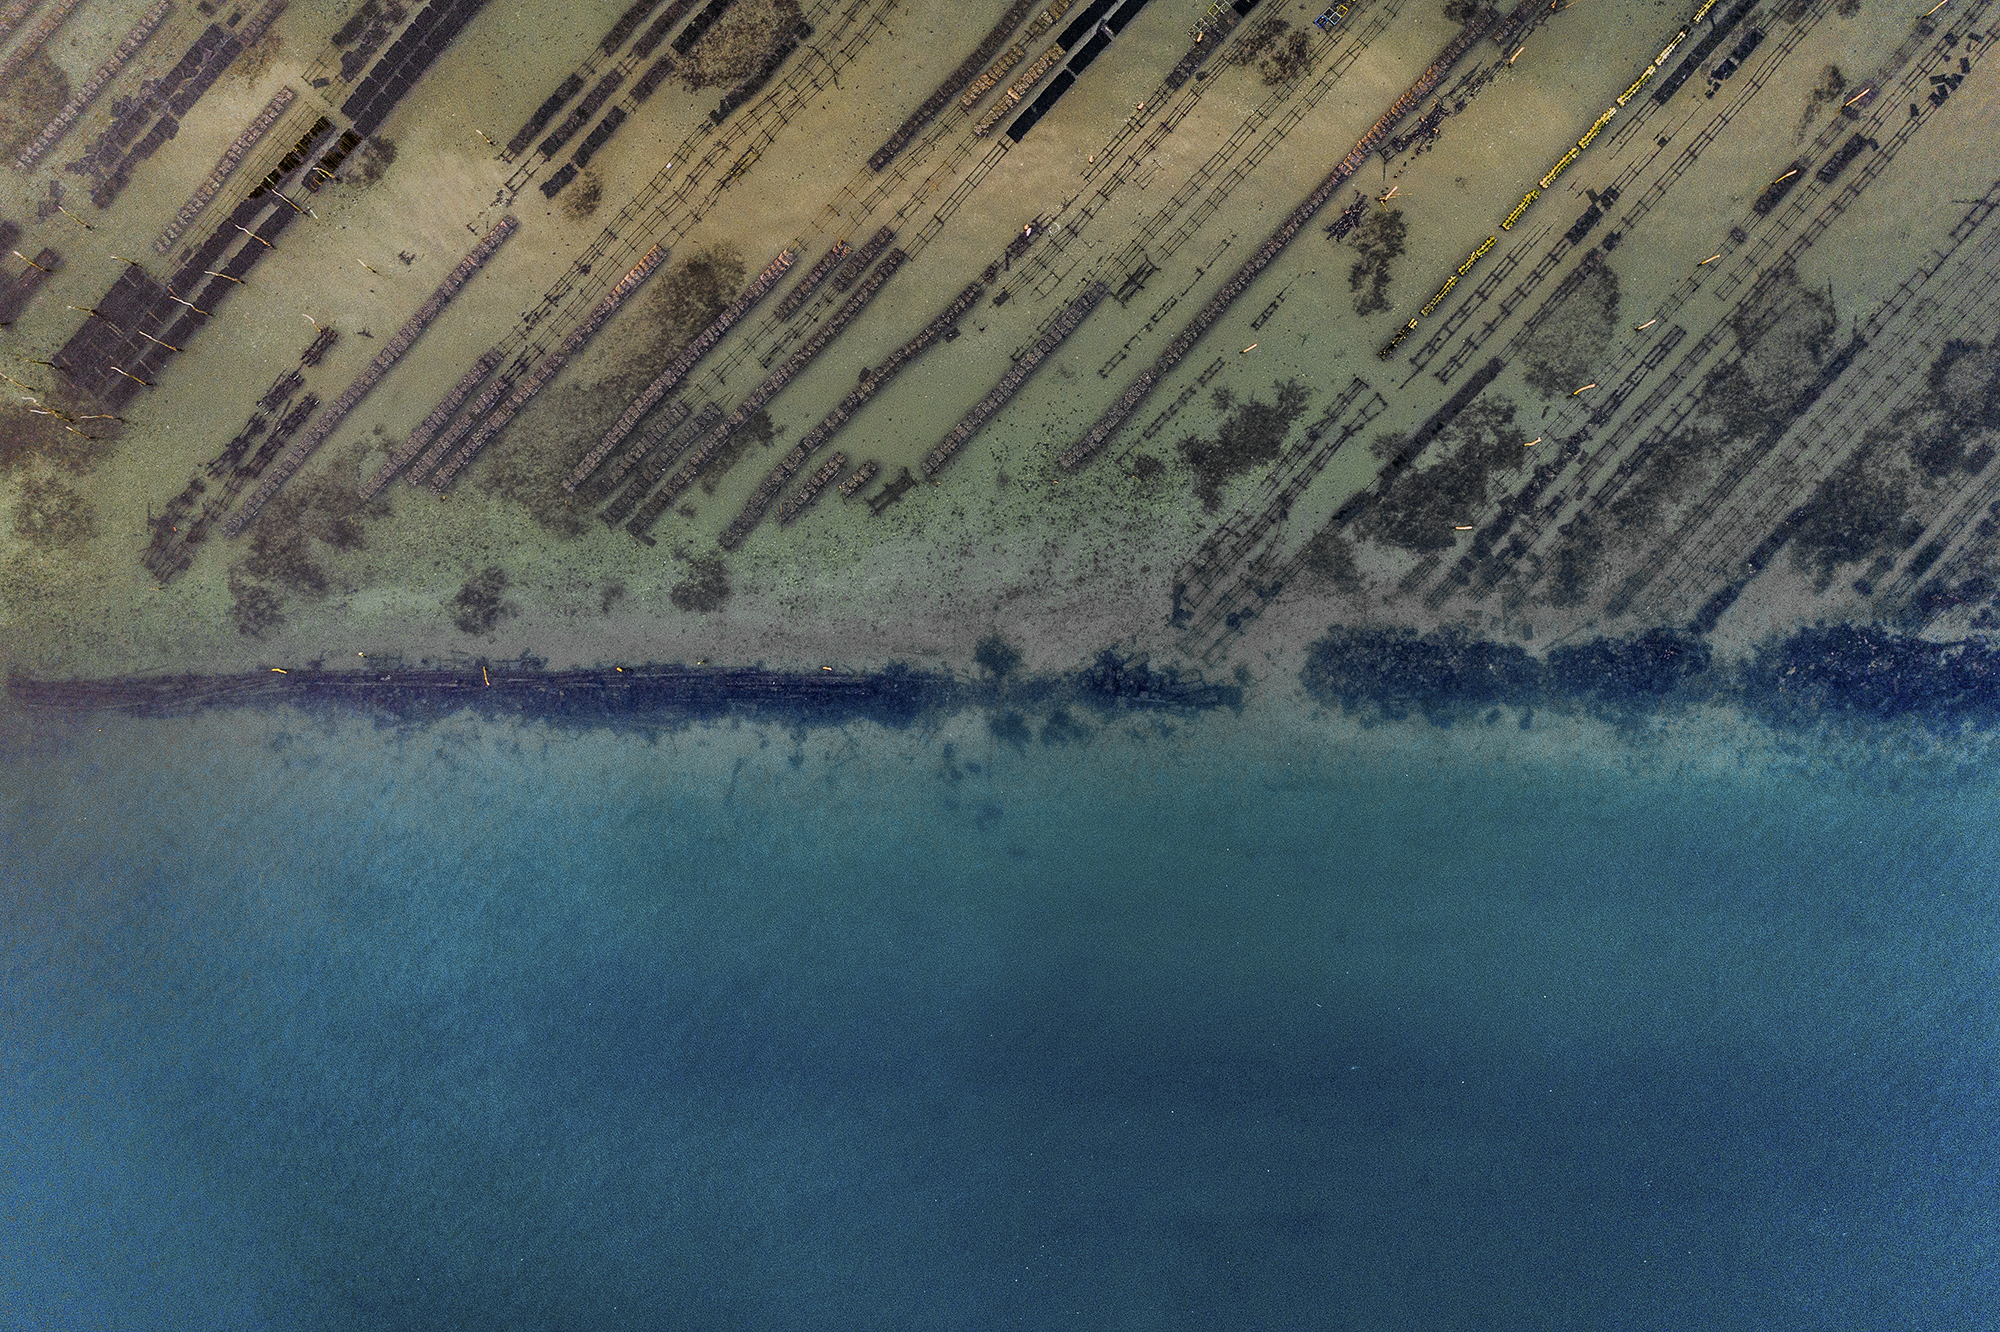 Aerial shot of an oyster bed at the edge of an estuary, Arcachon, France